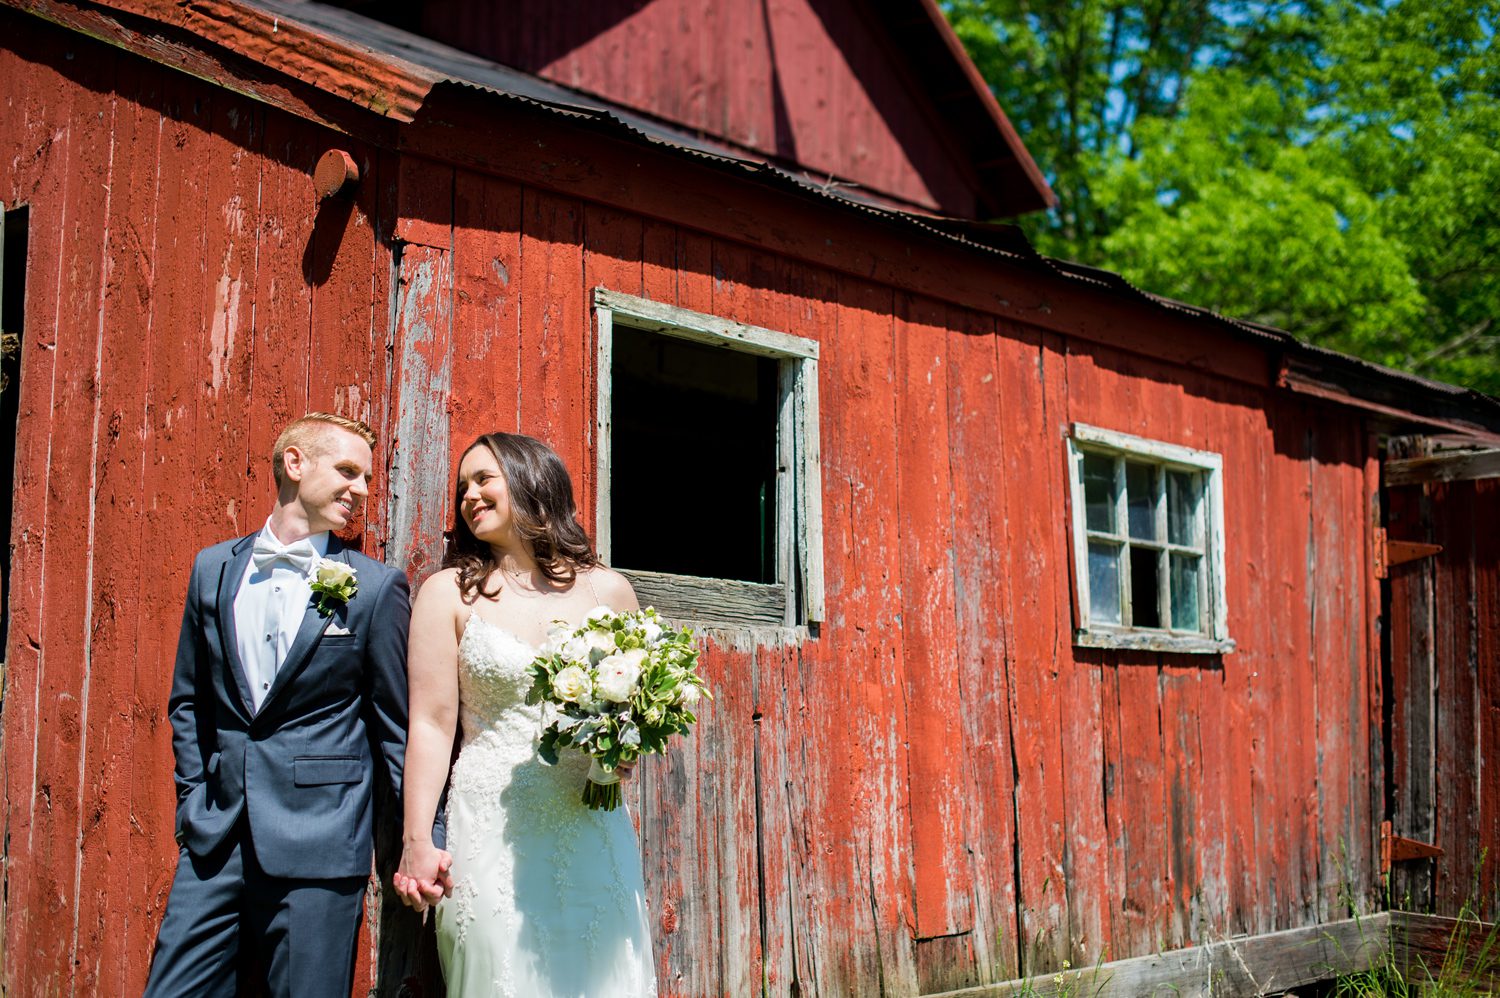 Wedding Venues in the Hudson Valley, NY